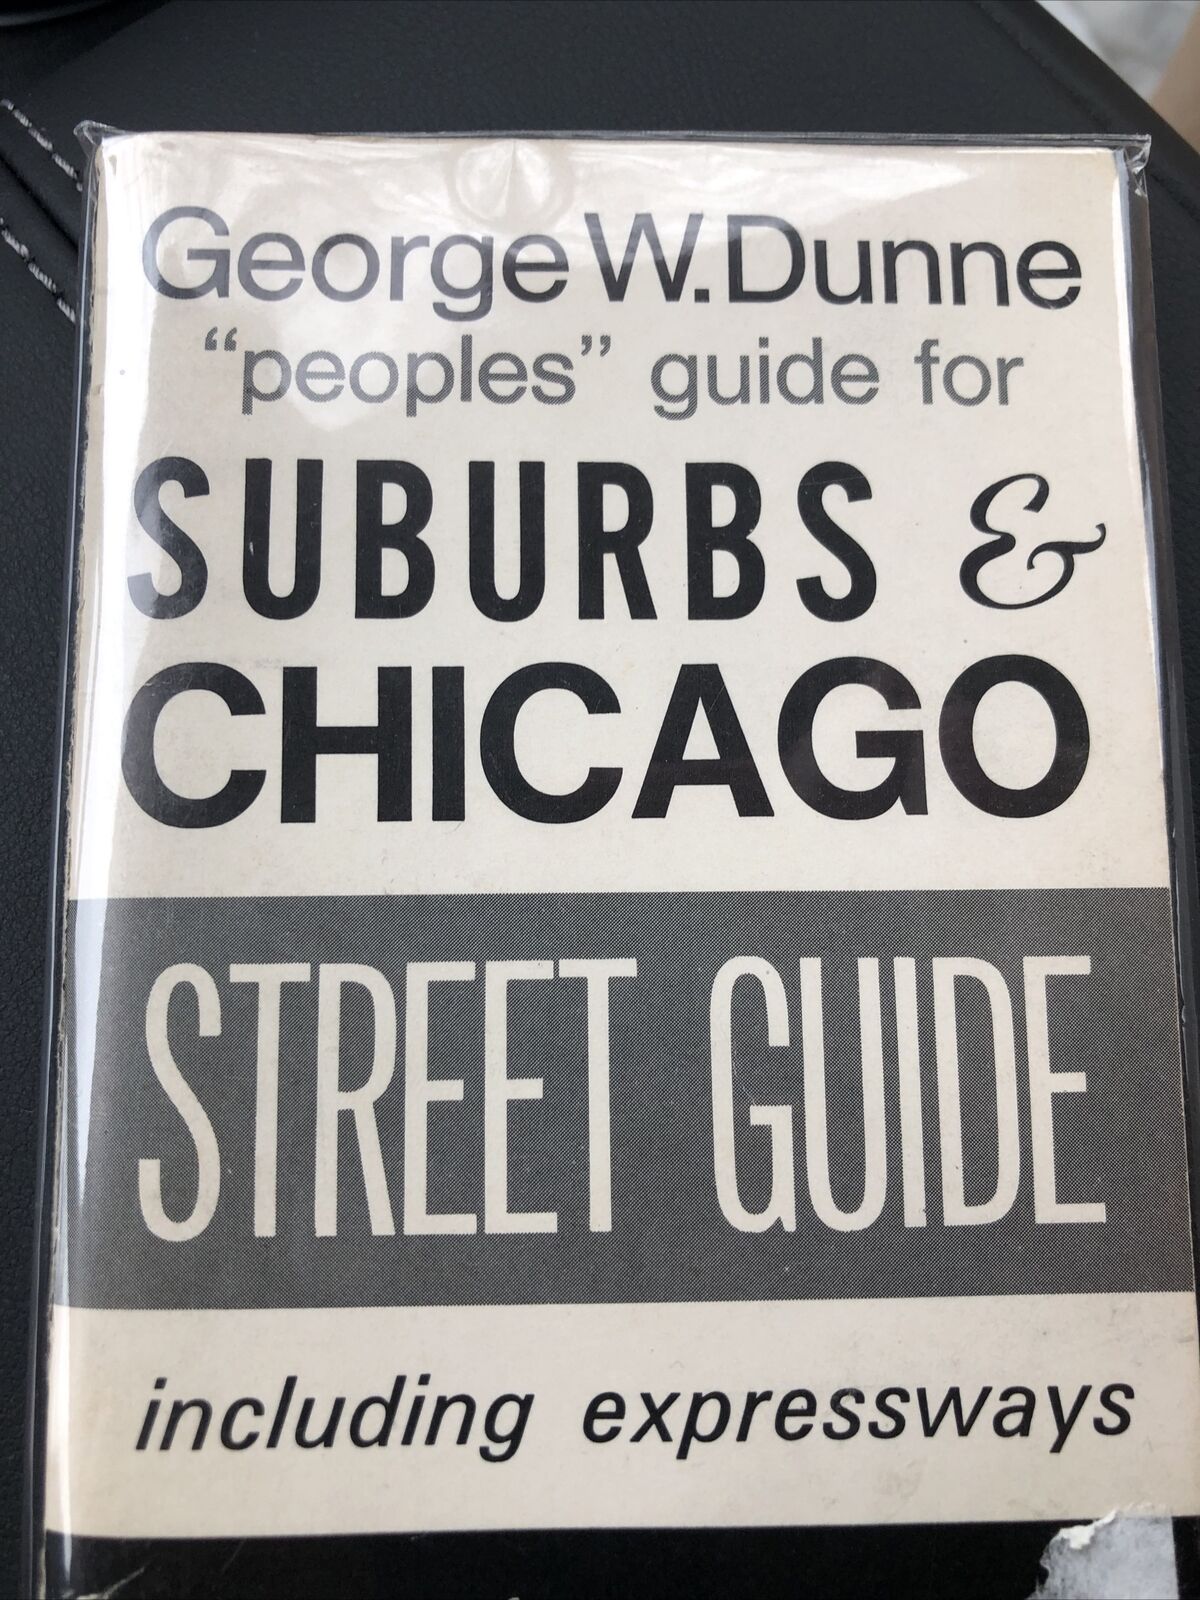 Chicago Politics:  George W. Dunne  Gave Out To Constituents. Real Politics ￼